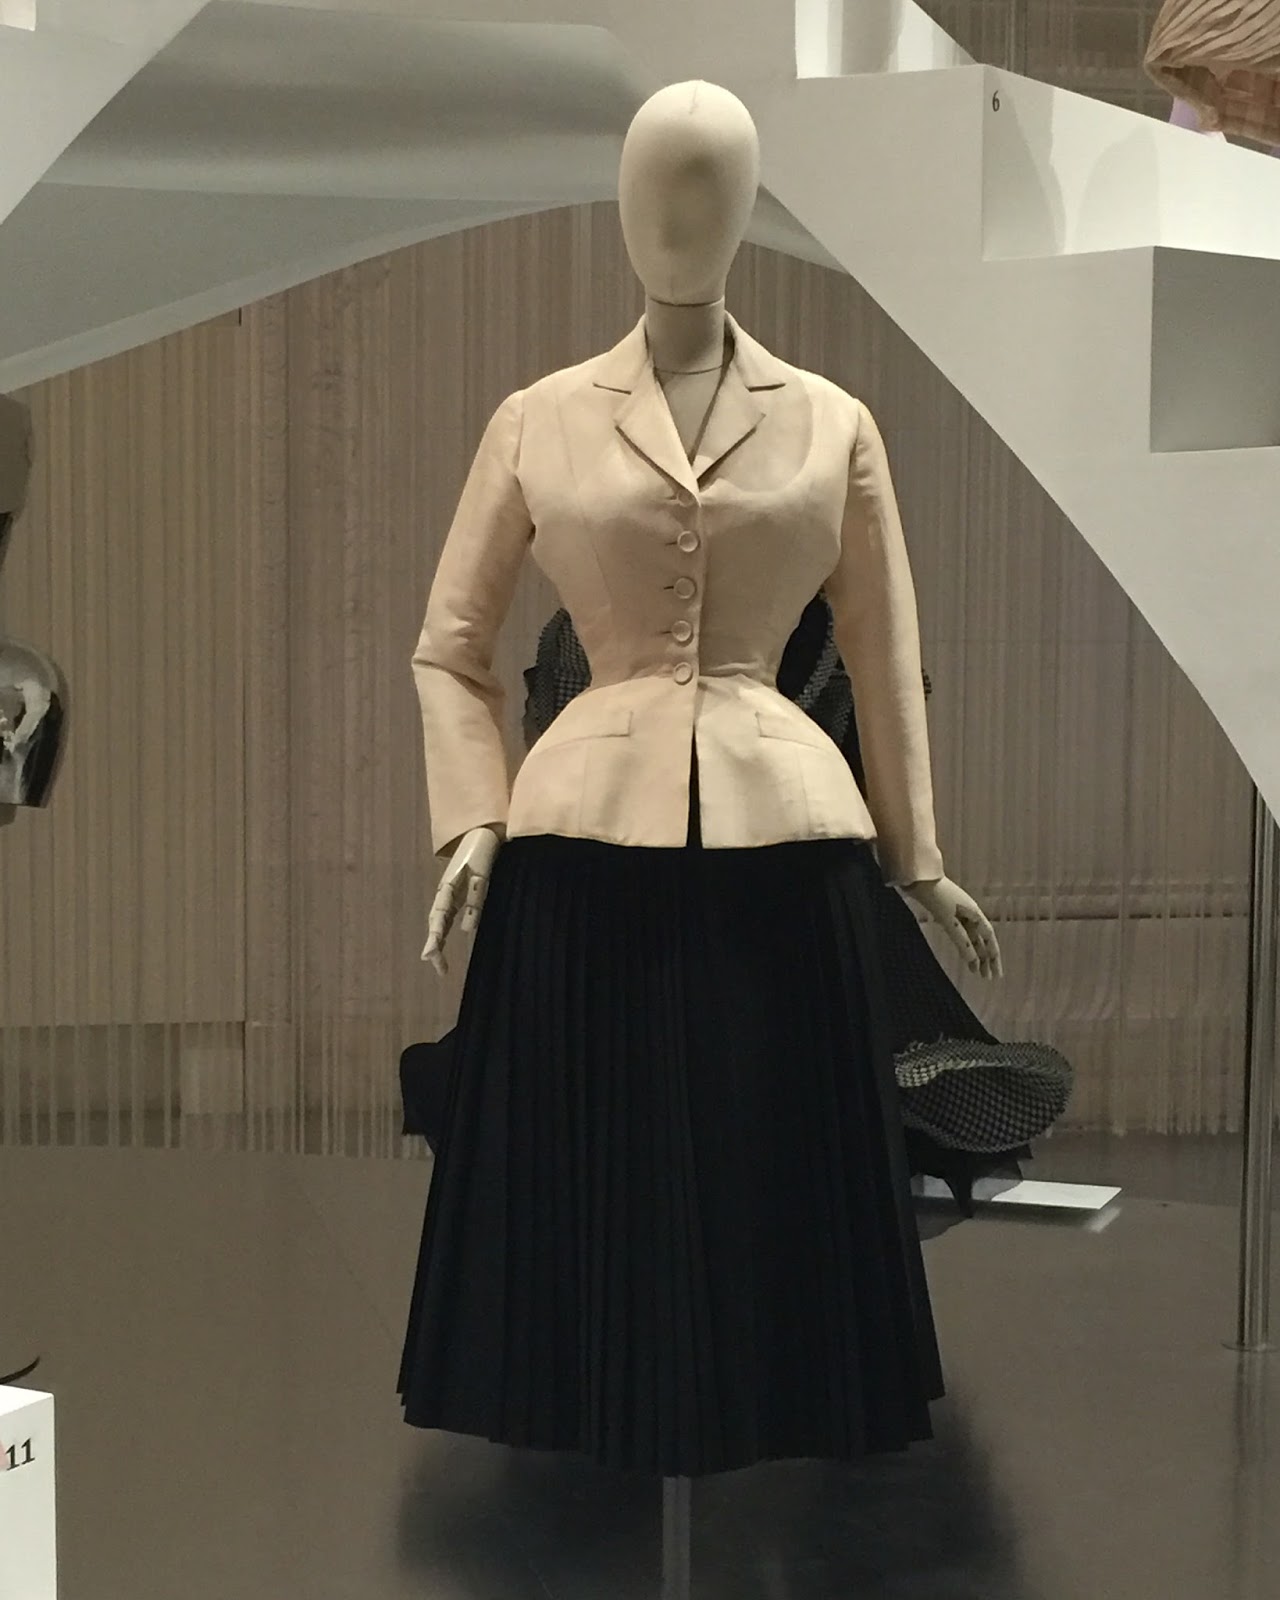 Fabulous Fashion: From Dior's New Look To NowAntiques And The Arts Weekly